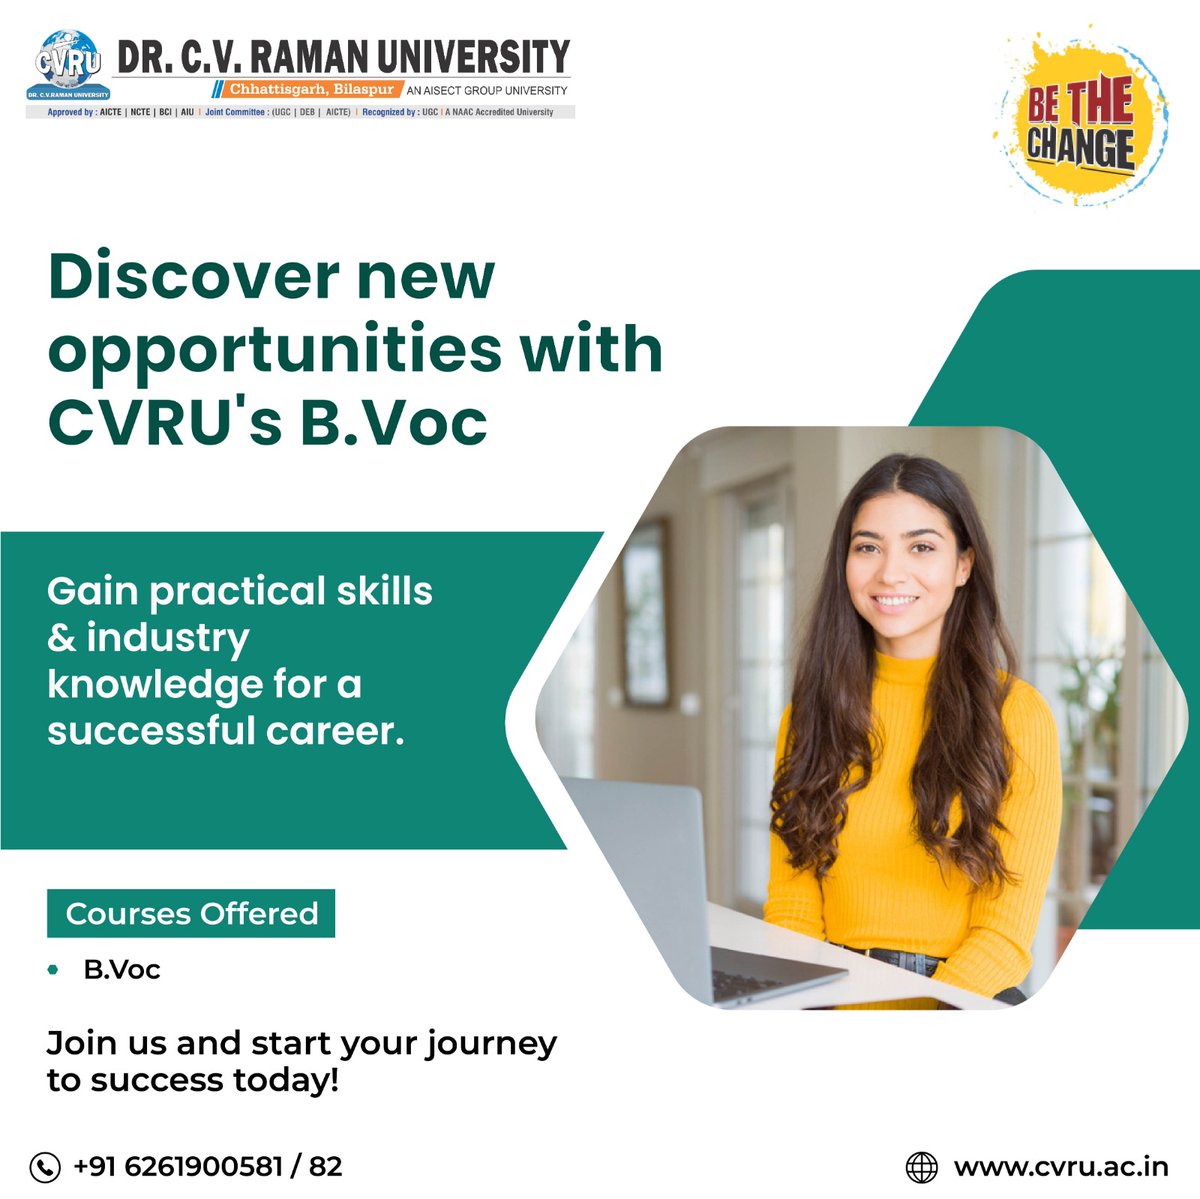 Discover exciting new opportunities with CVRU's B.Voc courses. These programs provide practical skills and industry knowledge essential for a successful career. Join us and start your journey towards a rewarding and fulfilling profession today!

#CVRUCG #BVoc #CareerSuccess